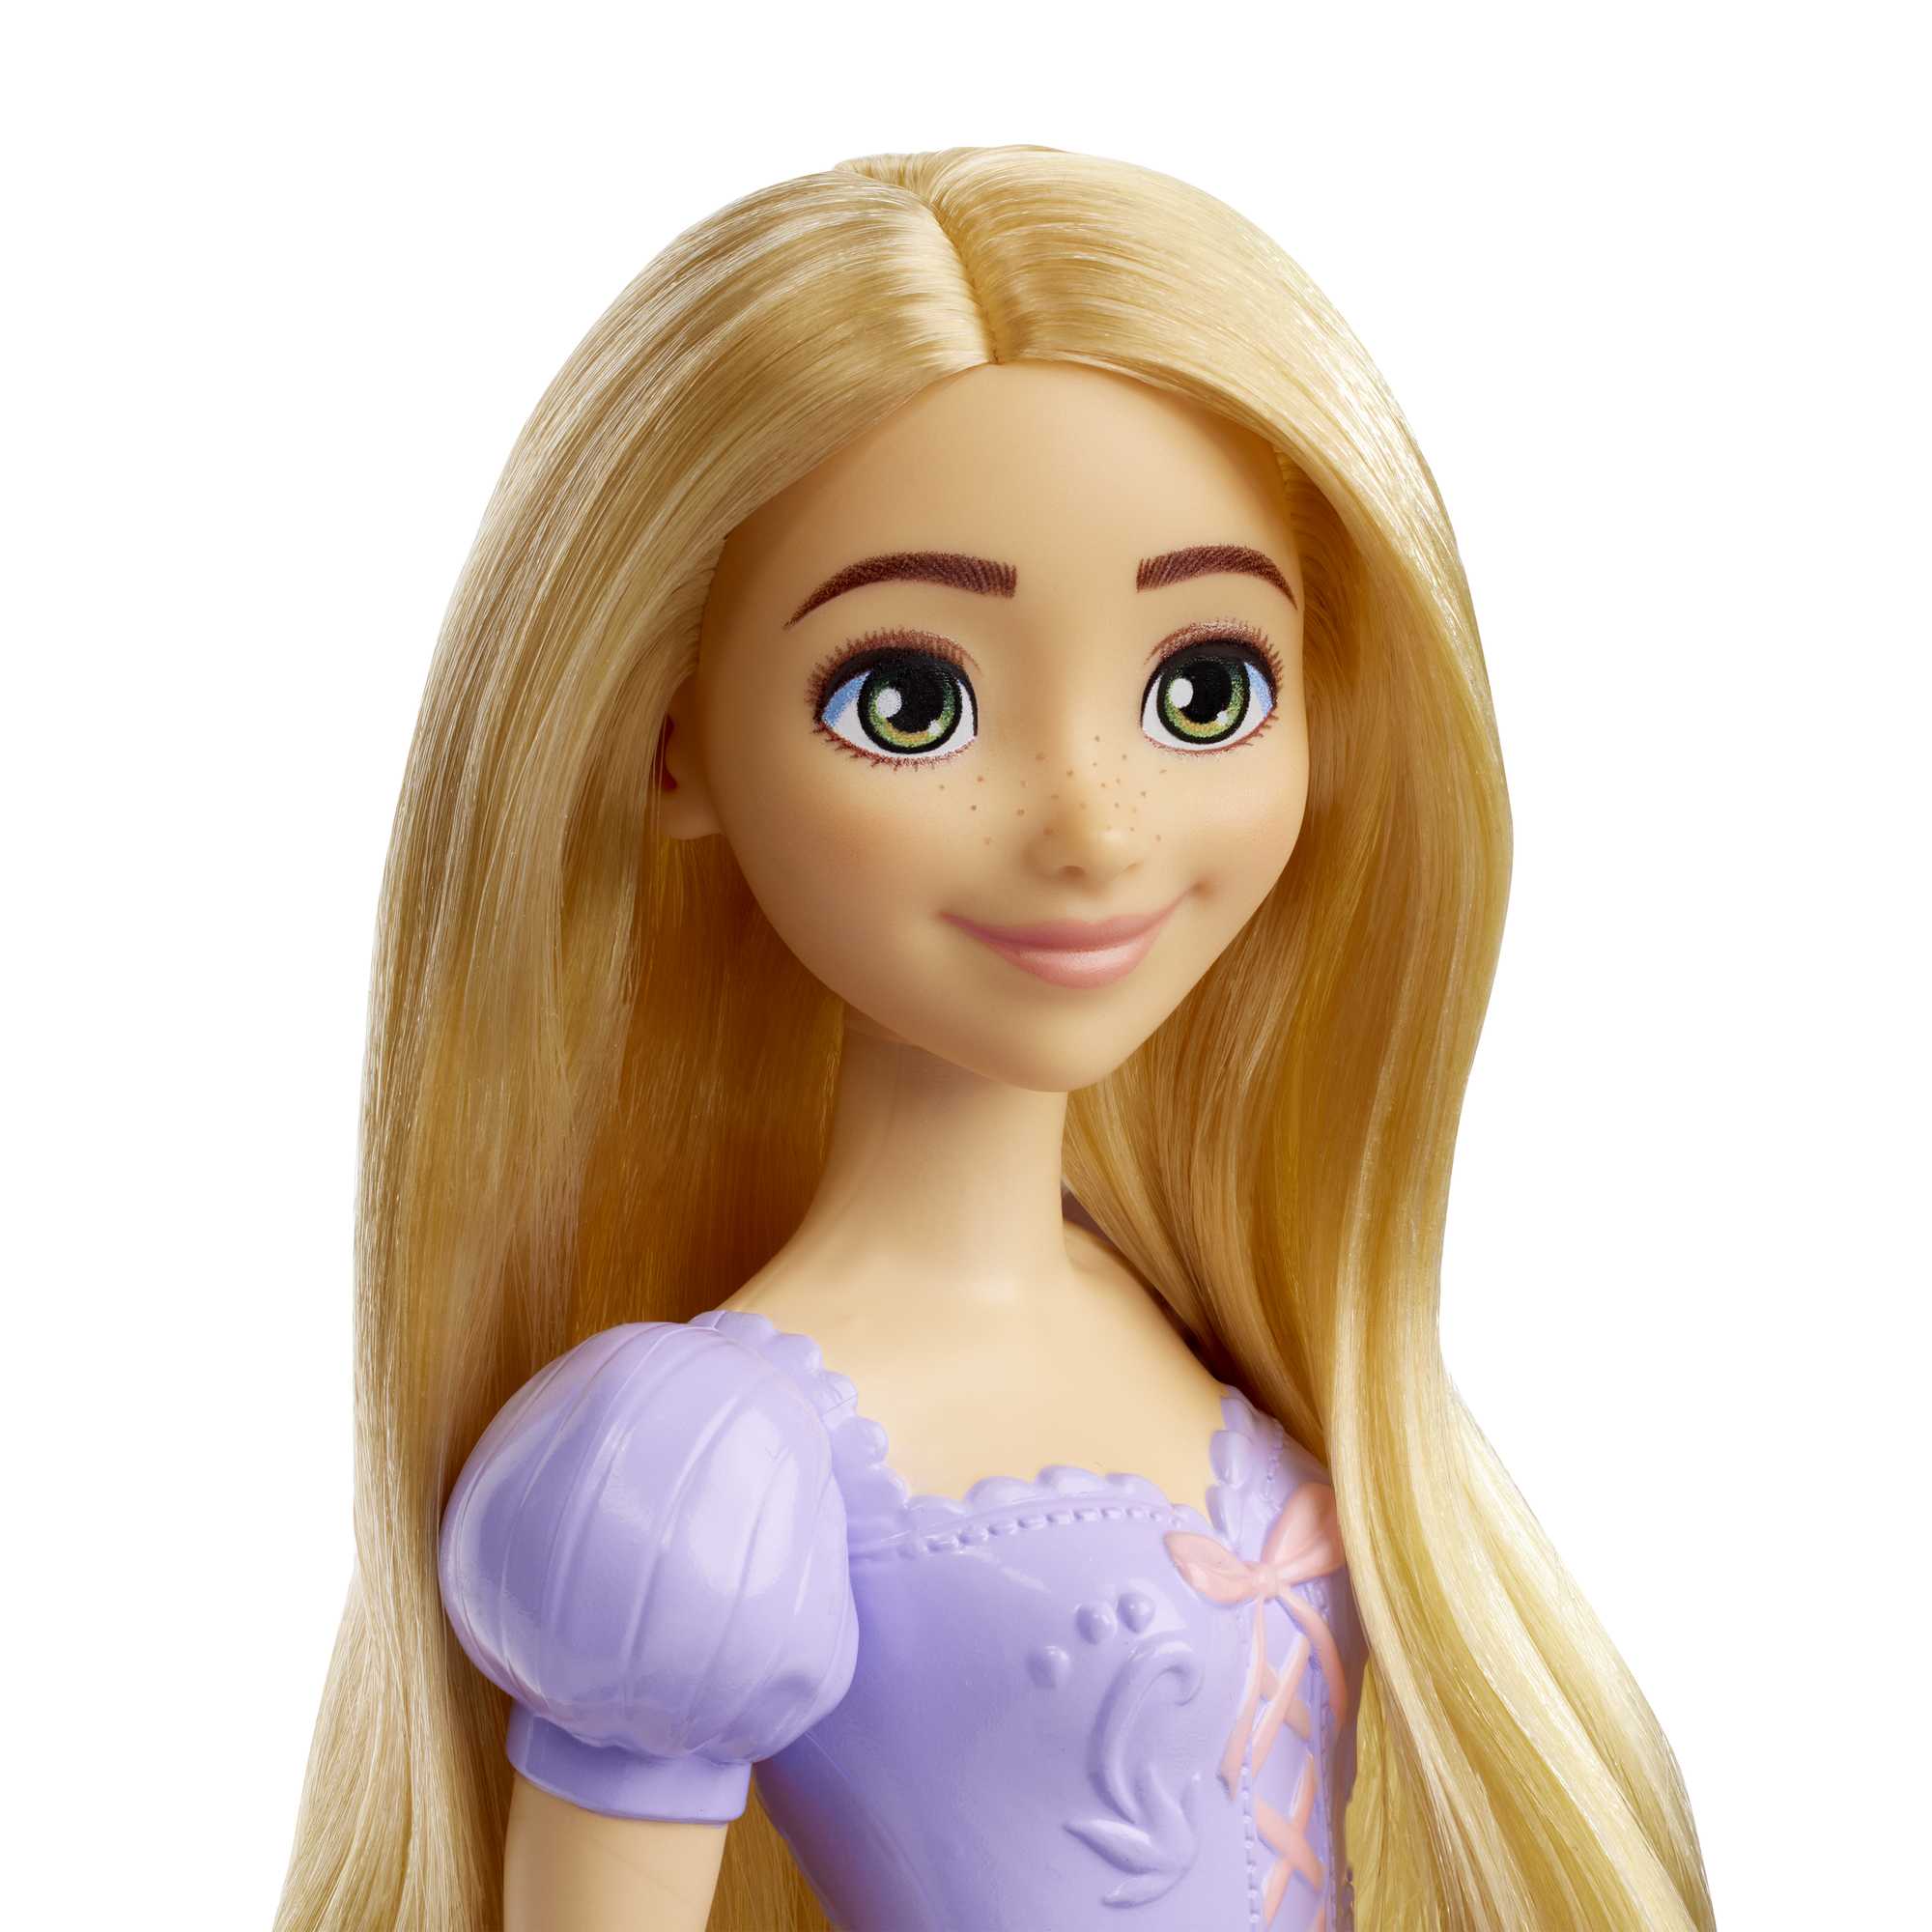 Disney Princess Rapunzel Fashion Doll, Character Friend and 3 Accessories - image 3 of 6